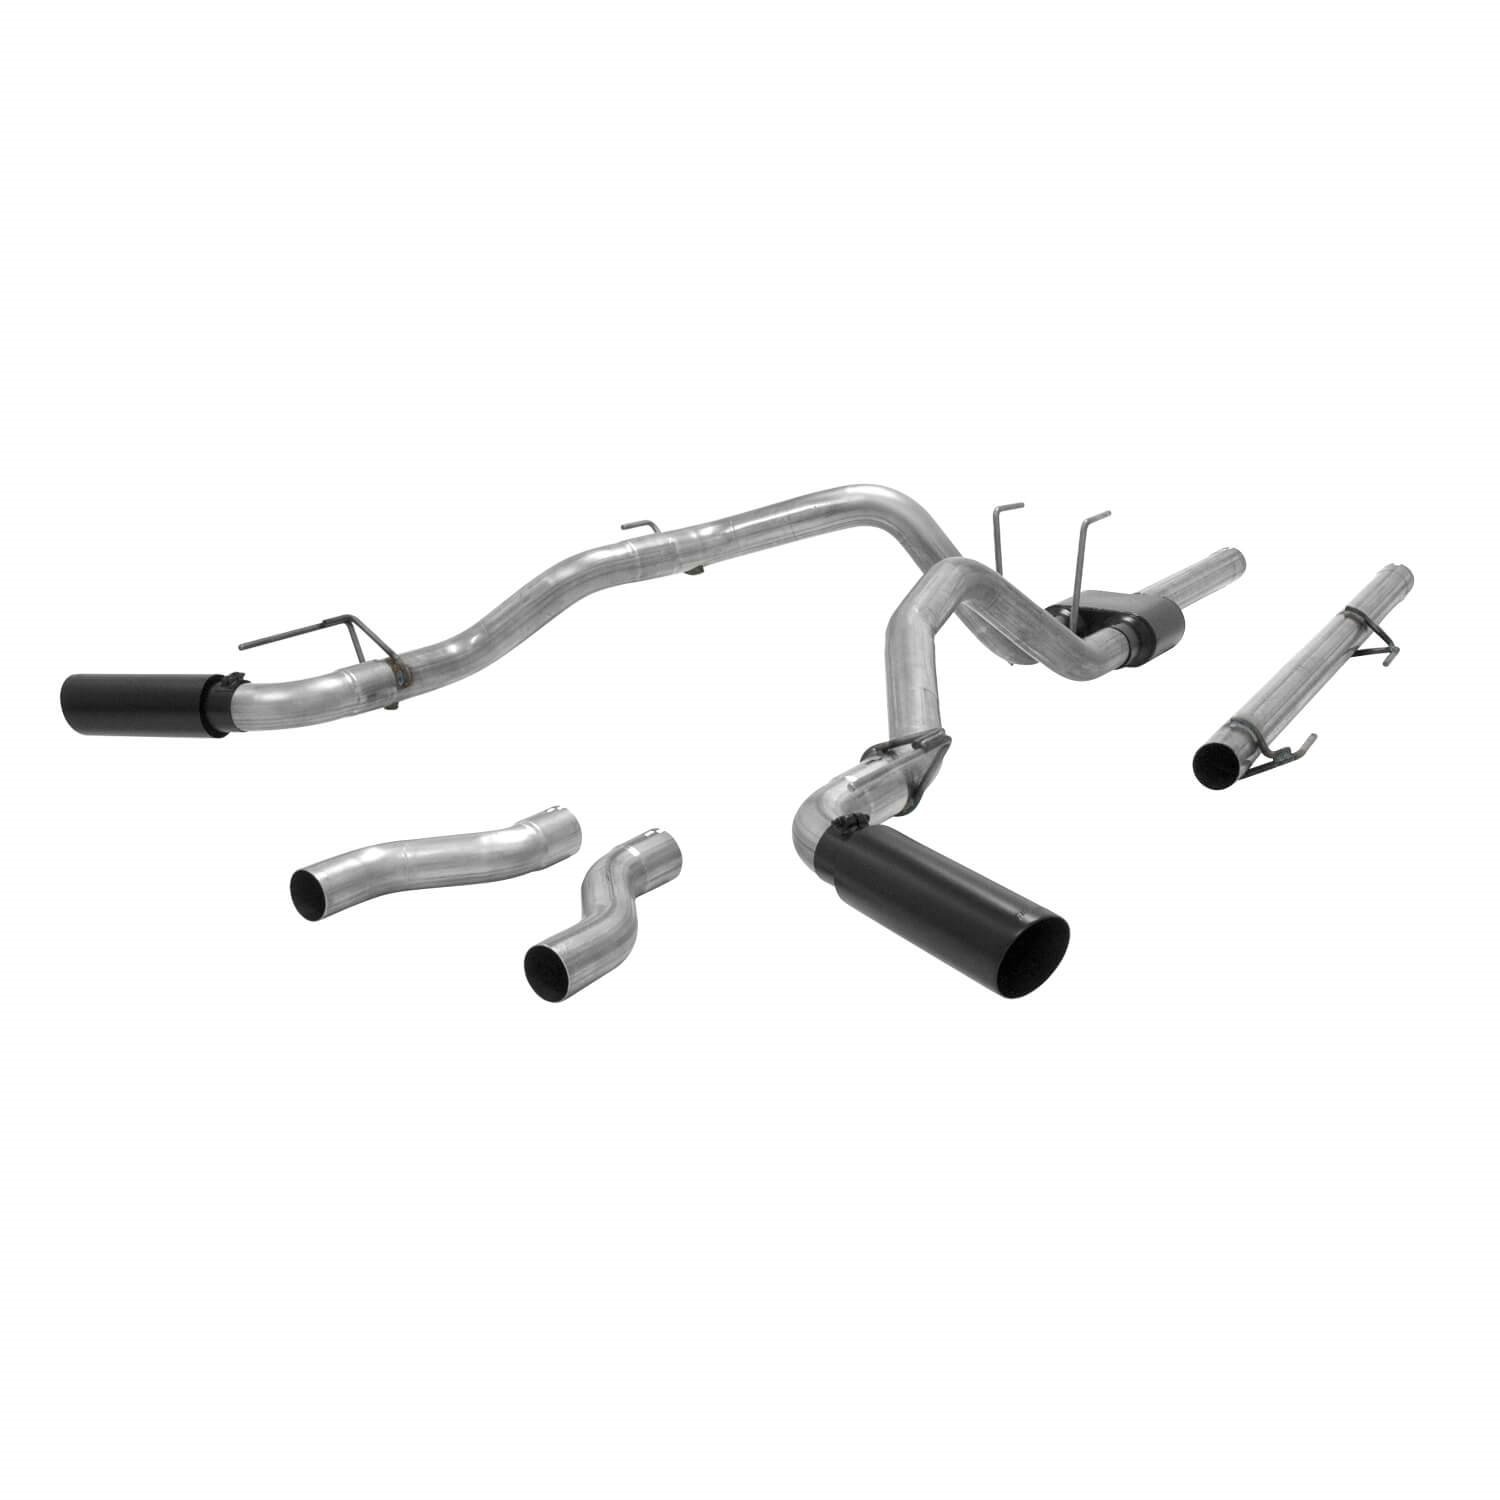 Outlaw Series Cat-Back Exhaust System 2009-2022 Dodge Ram 1500 4.7L/5.7L V8 Classic Body